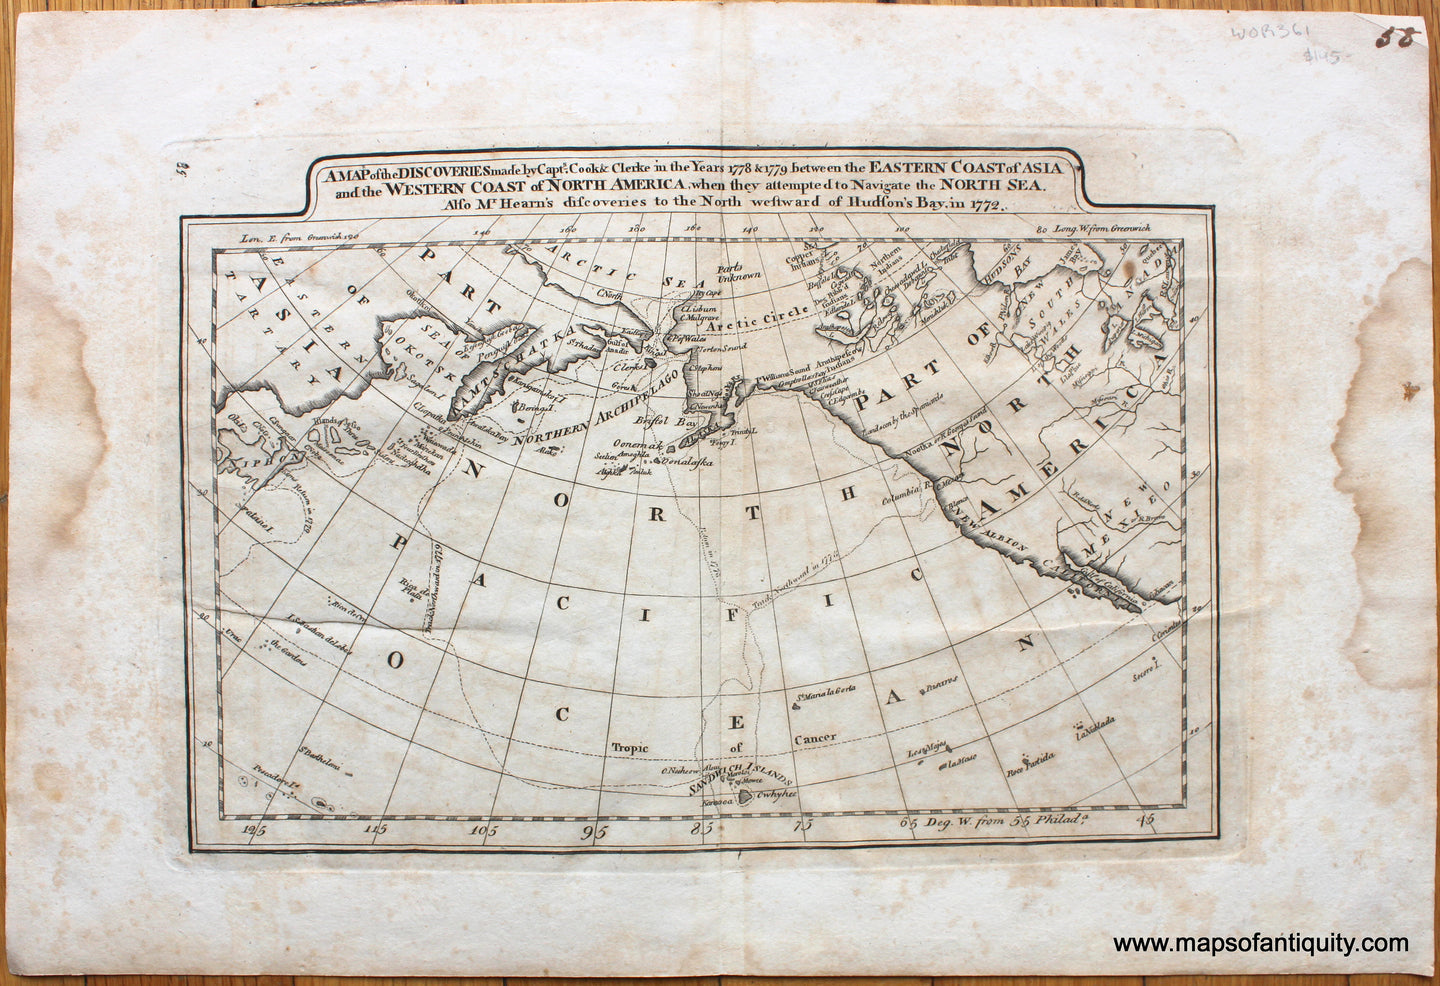 Genuine-Antique-Map-A-Map-of-the-Discoveries-made-by-Captn.s-Cook-&-Clerke-in-the-Years-1778-&-1779-between-the-Eastern-Coast-of-Asia-and-the-Western-Coast-of-North-America-when-they-attempted-to-Navigate-the-North-Sea.--Also-Mr.-Hearn's-discoveries-to-the-North-westward-of-Hudson's-Bay-in-1772.-c.-1815-Matthew-Cary-Maps-Of-Antiquity-1800s-19th-century